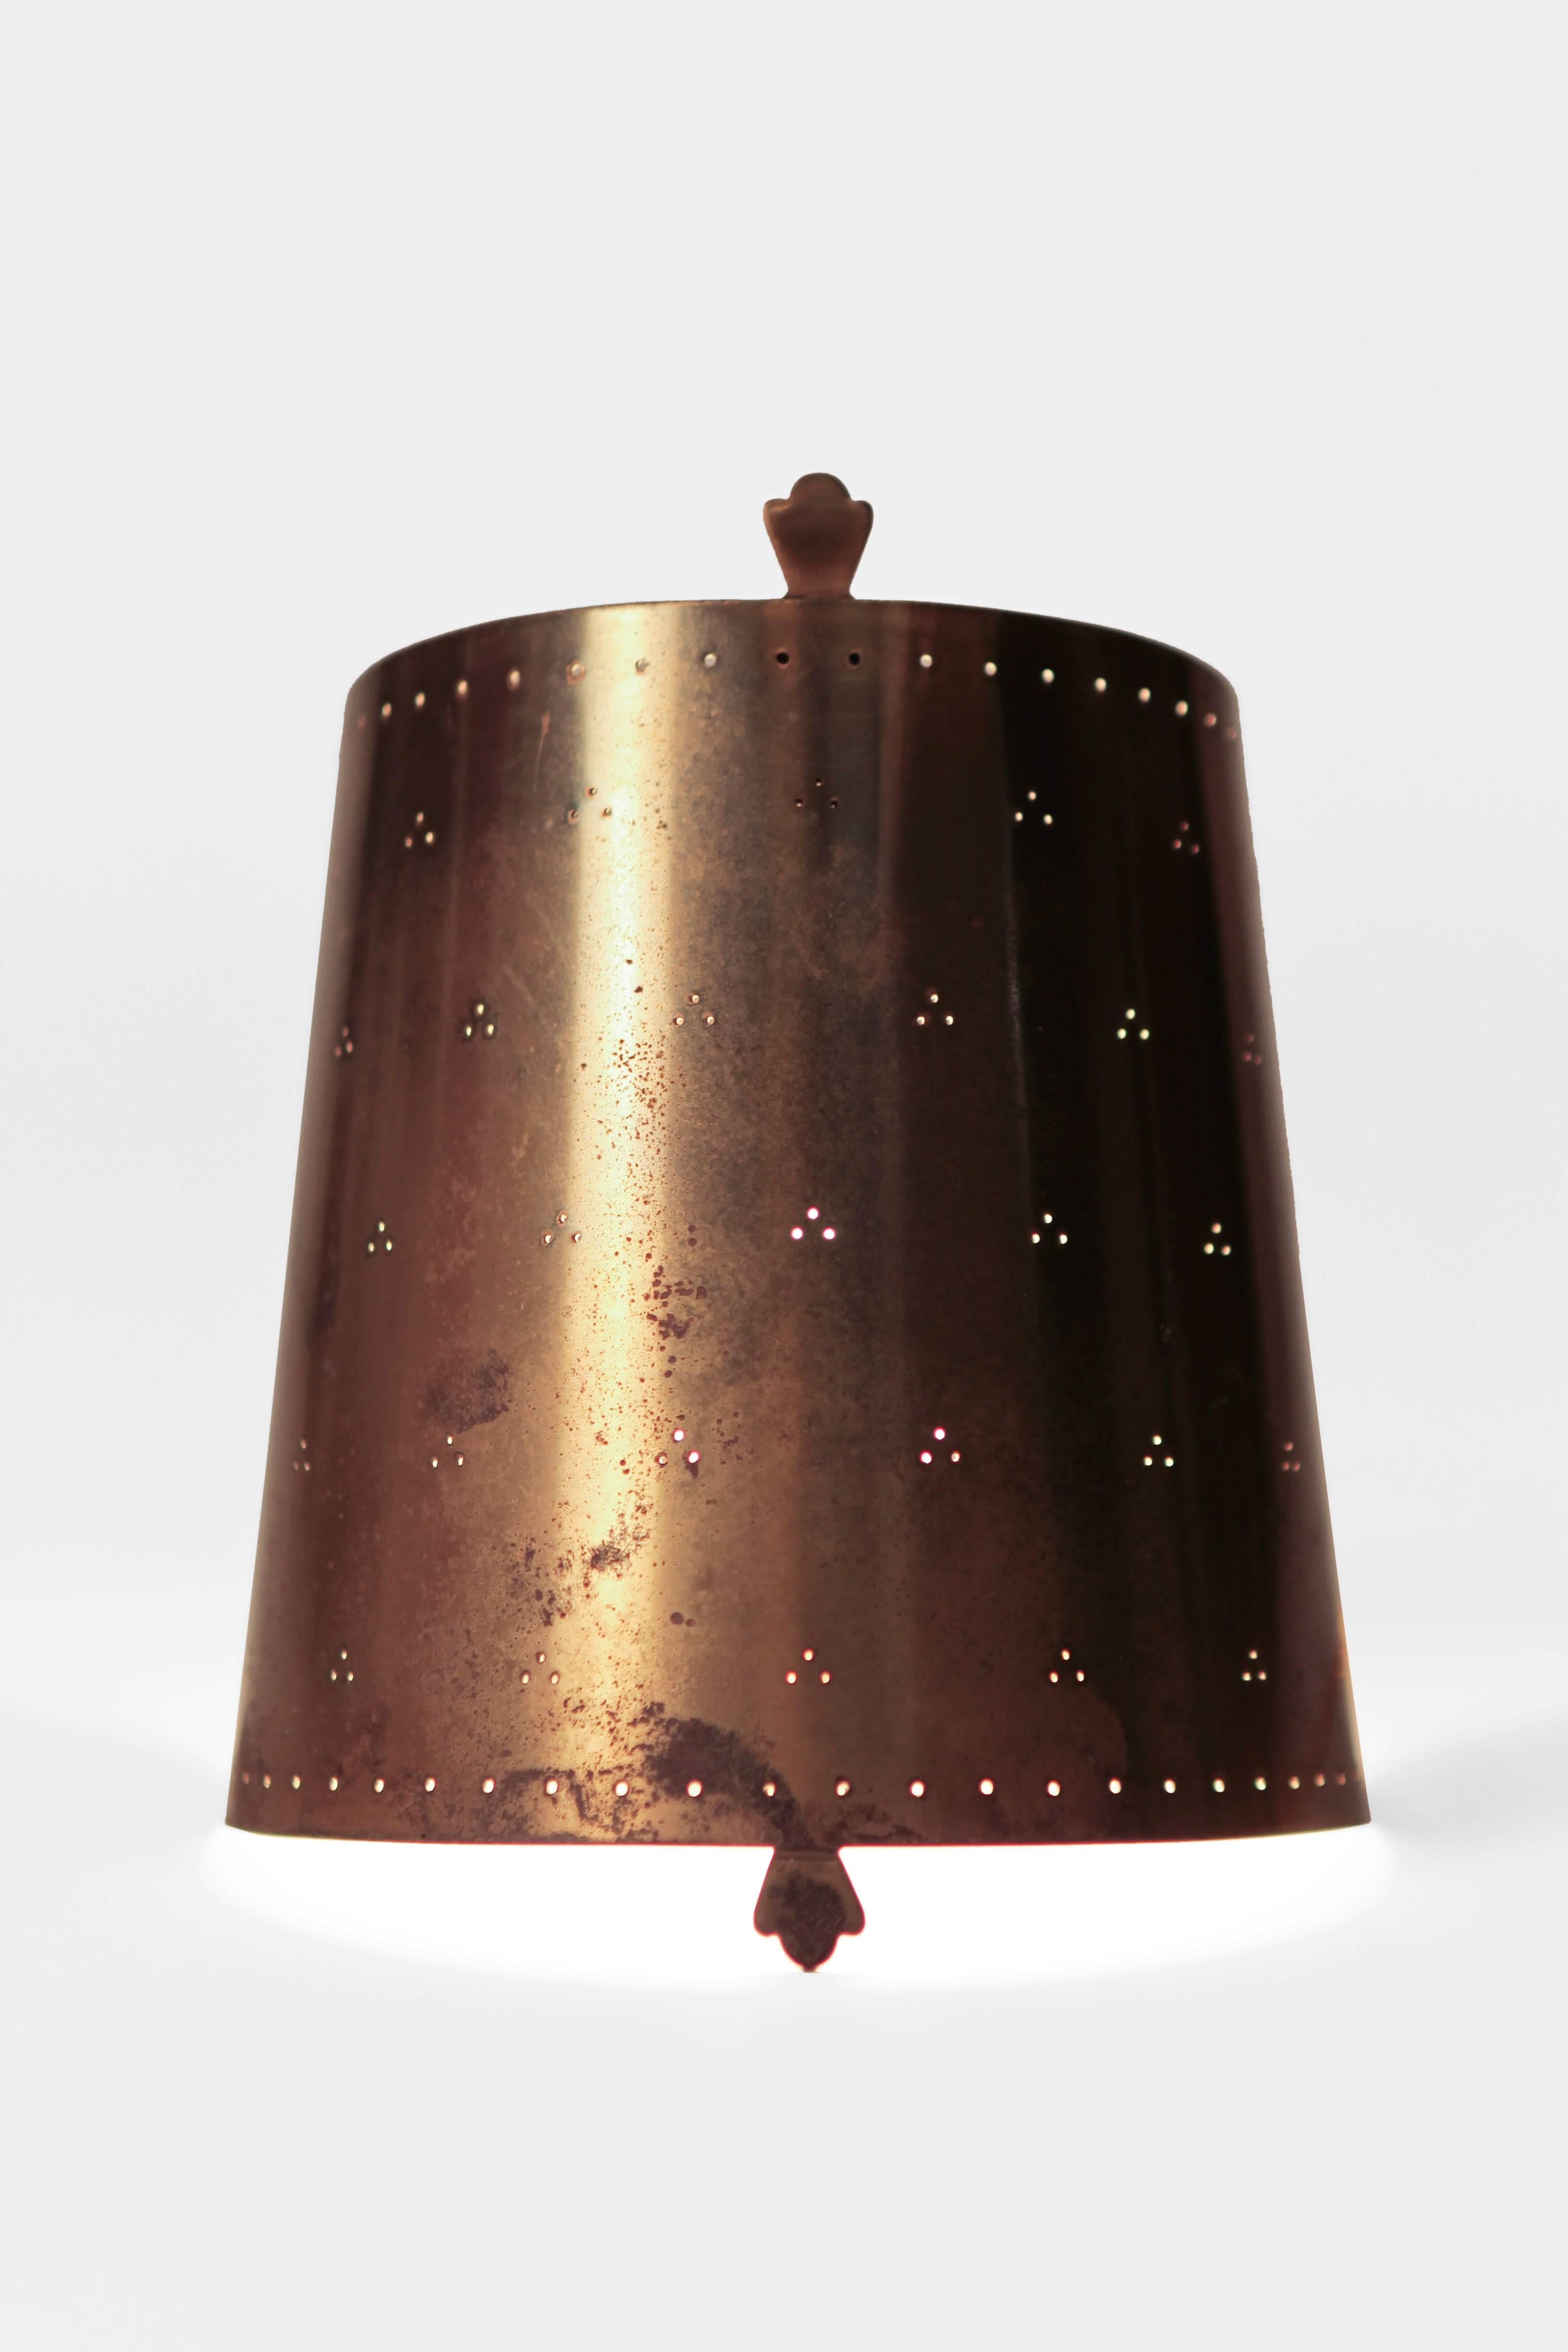 Brass Pair of Alfred Müller Wall Lights by AMBA, 1940s